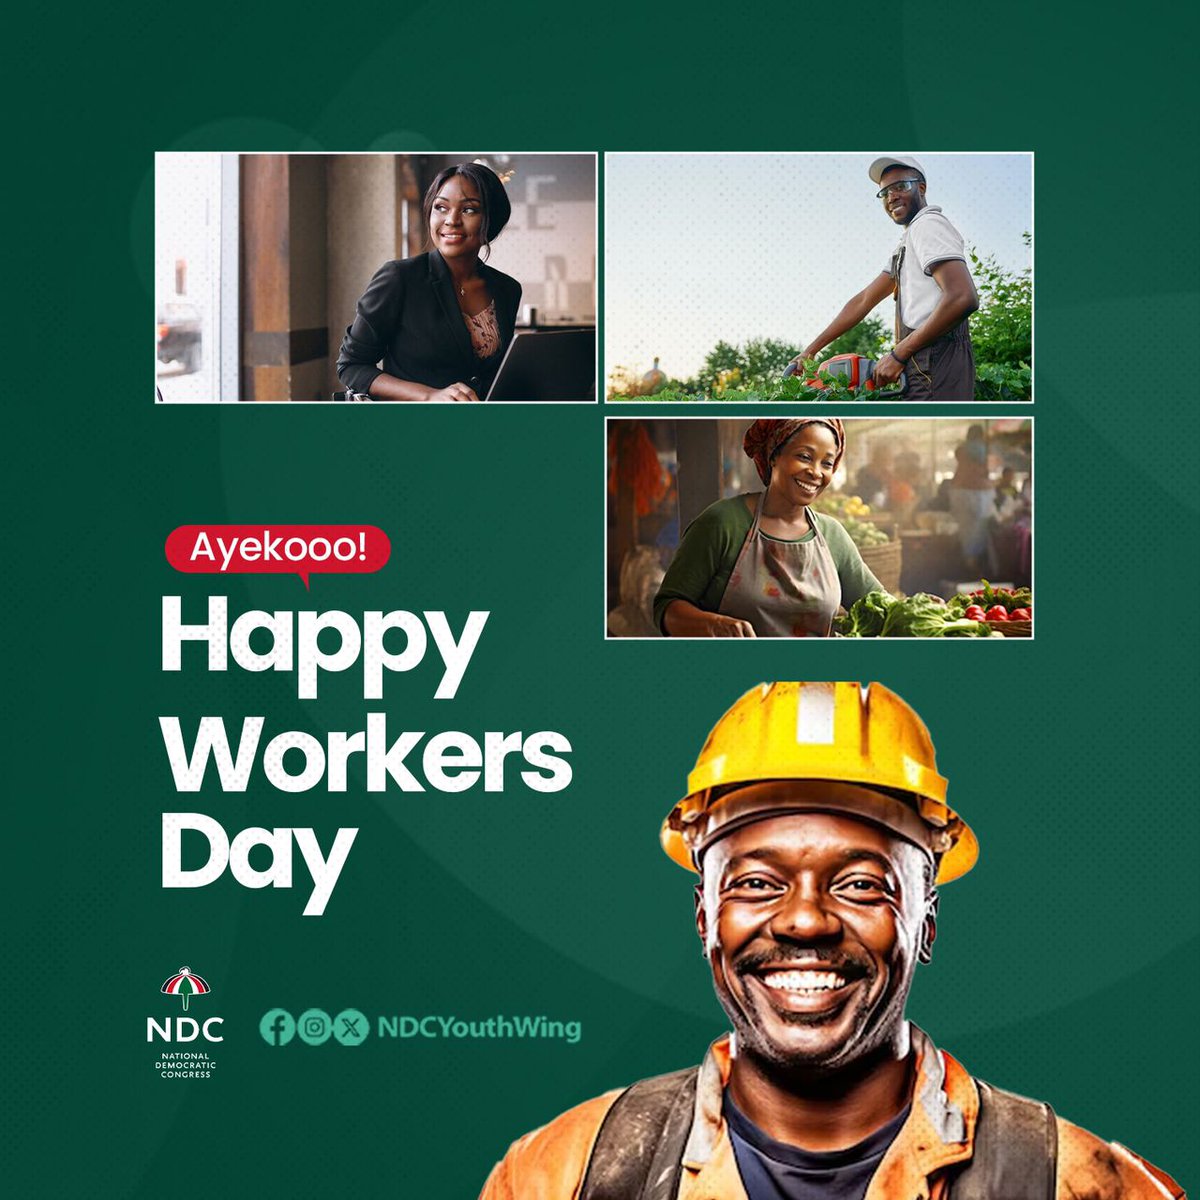 A big thank you to our amazing workforce, the true heroes working tirelessly behind the scenes to make Ghana work. Your efforts and commitment make a difference every day. Have a great day! #WorkersDay